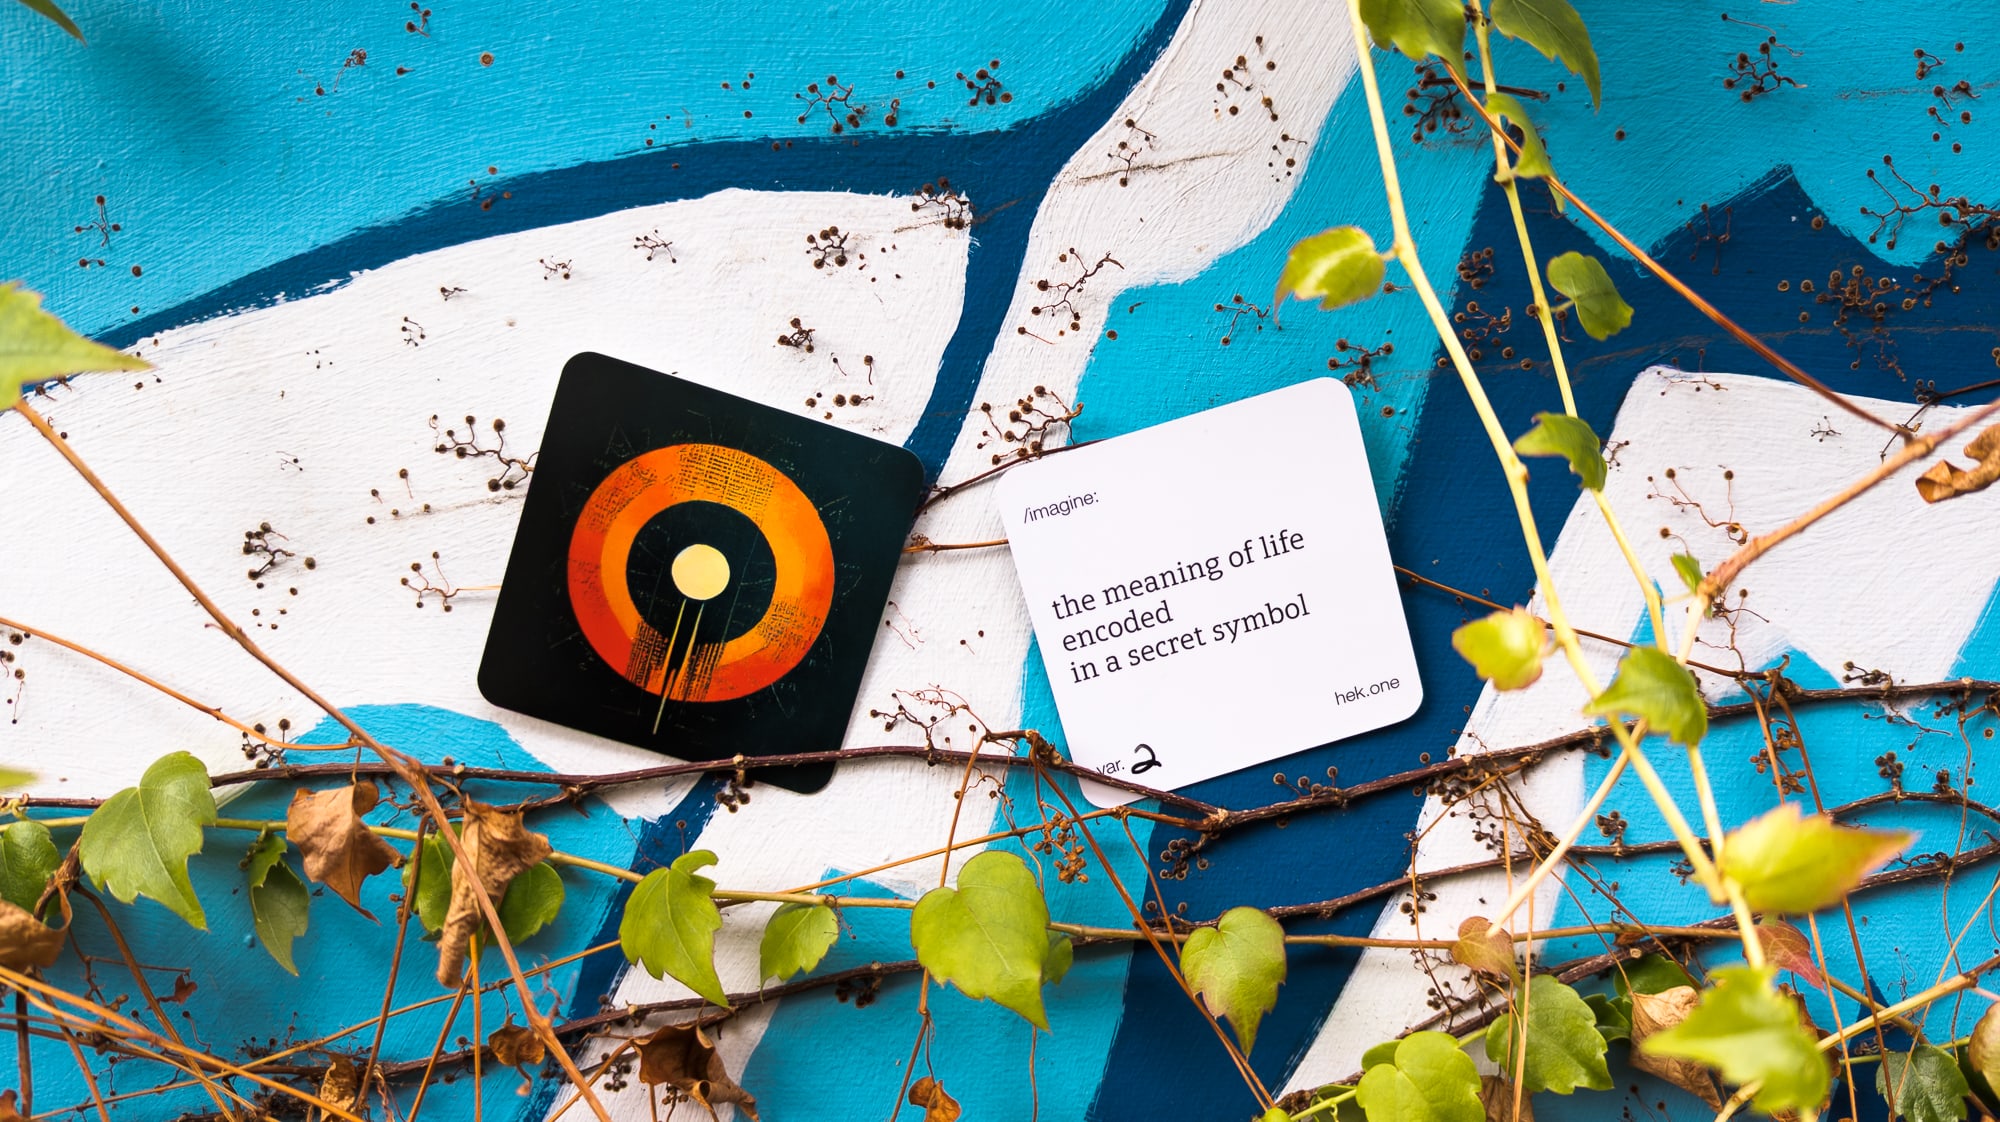 two square business cards held by vines against a wall covered in colourful graffiti. One card bears an abstract symbol; the other card bears the text "the meaning of life encoded in a secret symbol"